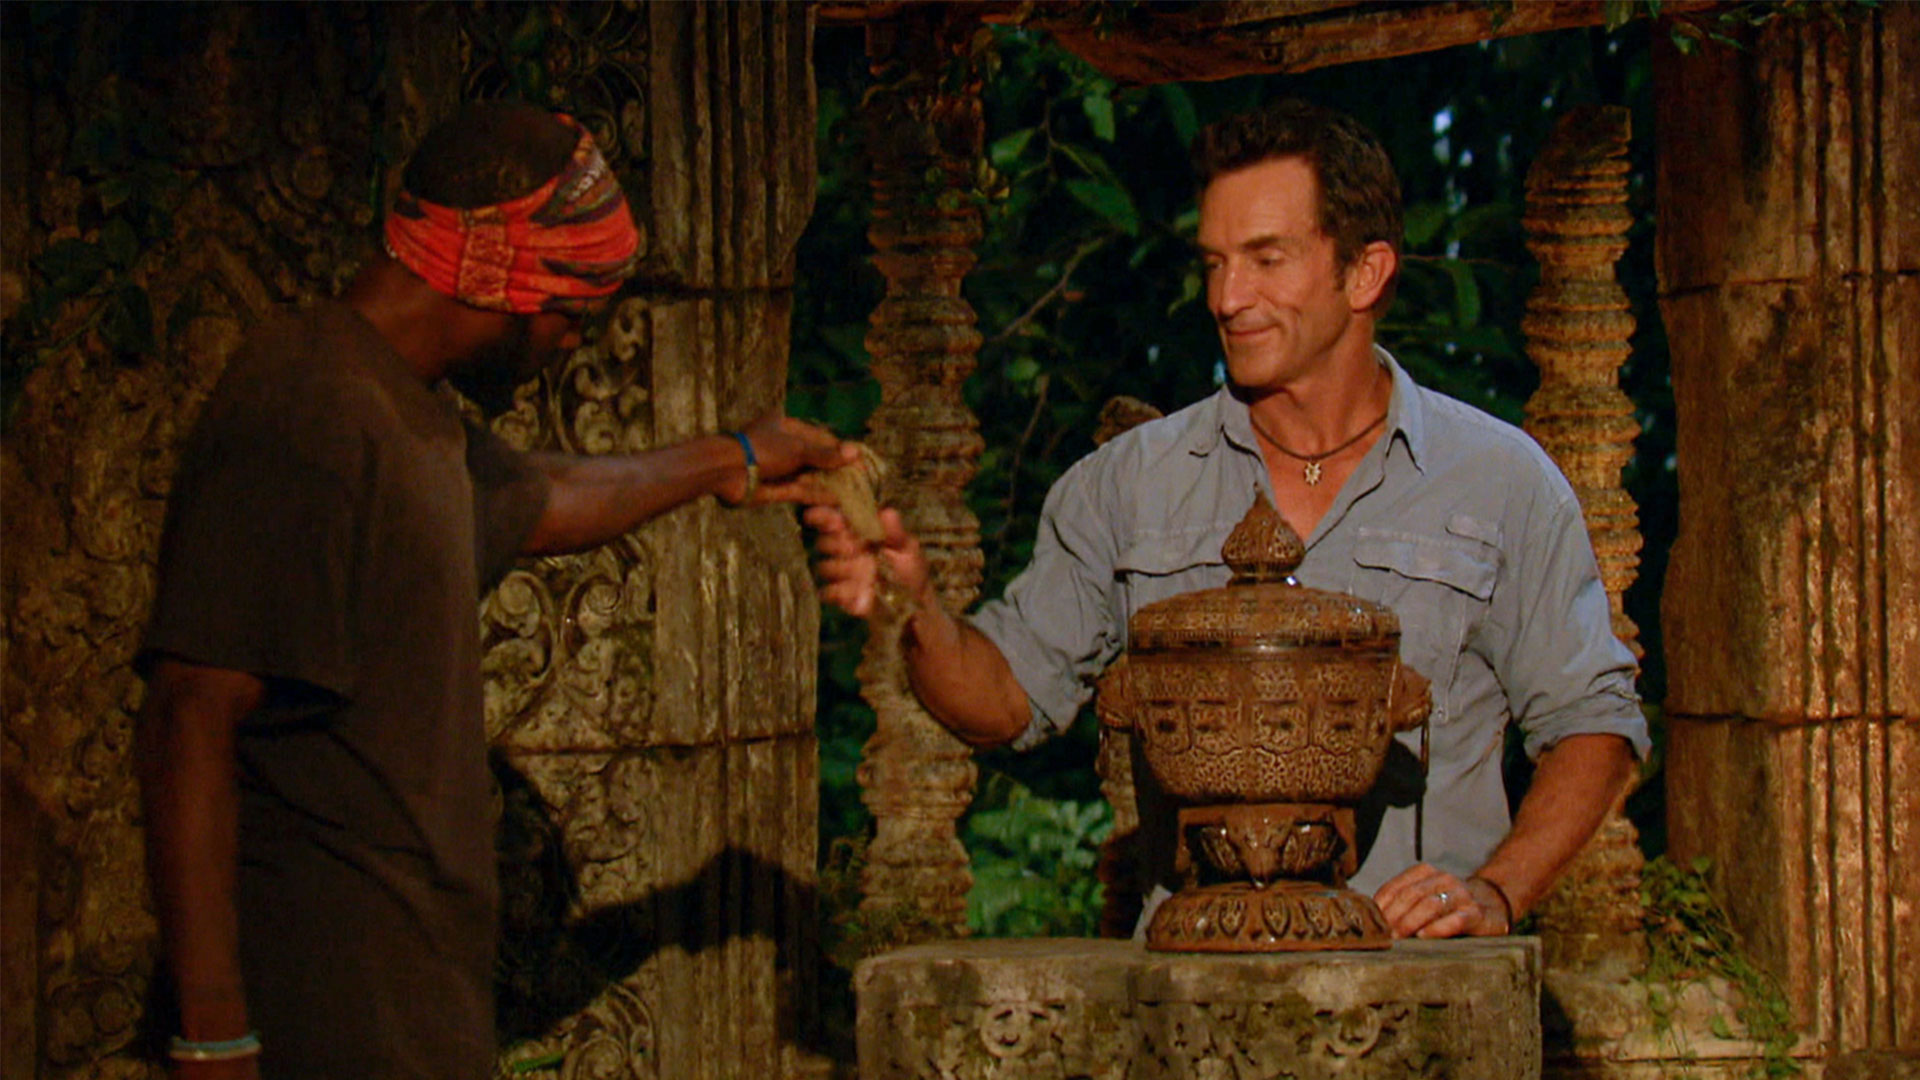 Watch Survivor At 40: Greatest Moments And Players On Wednesday, Feb. 5